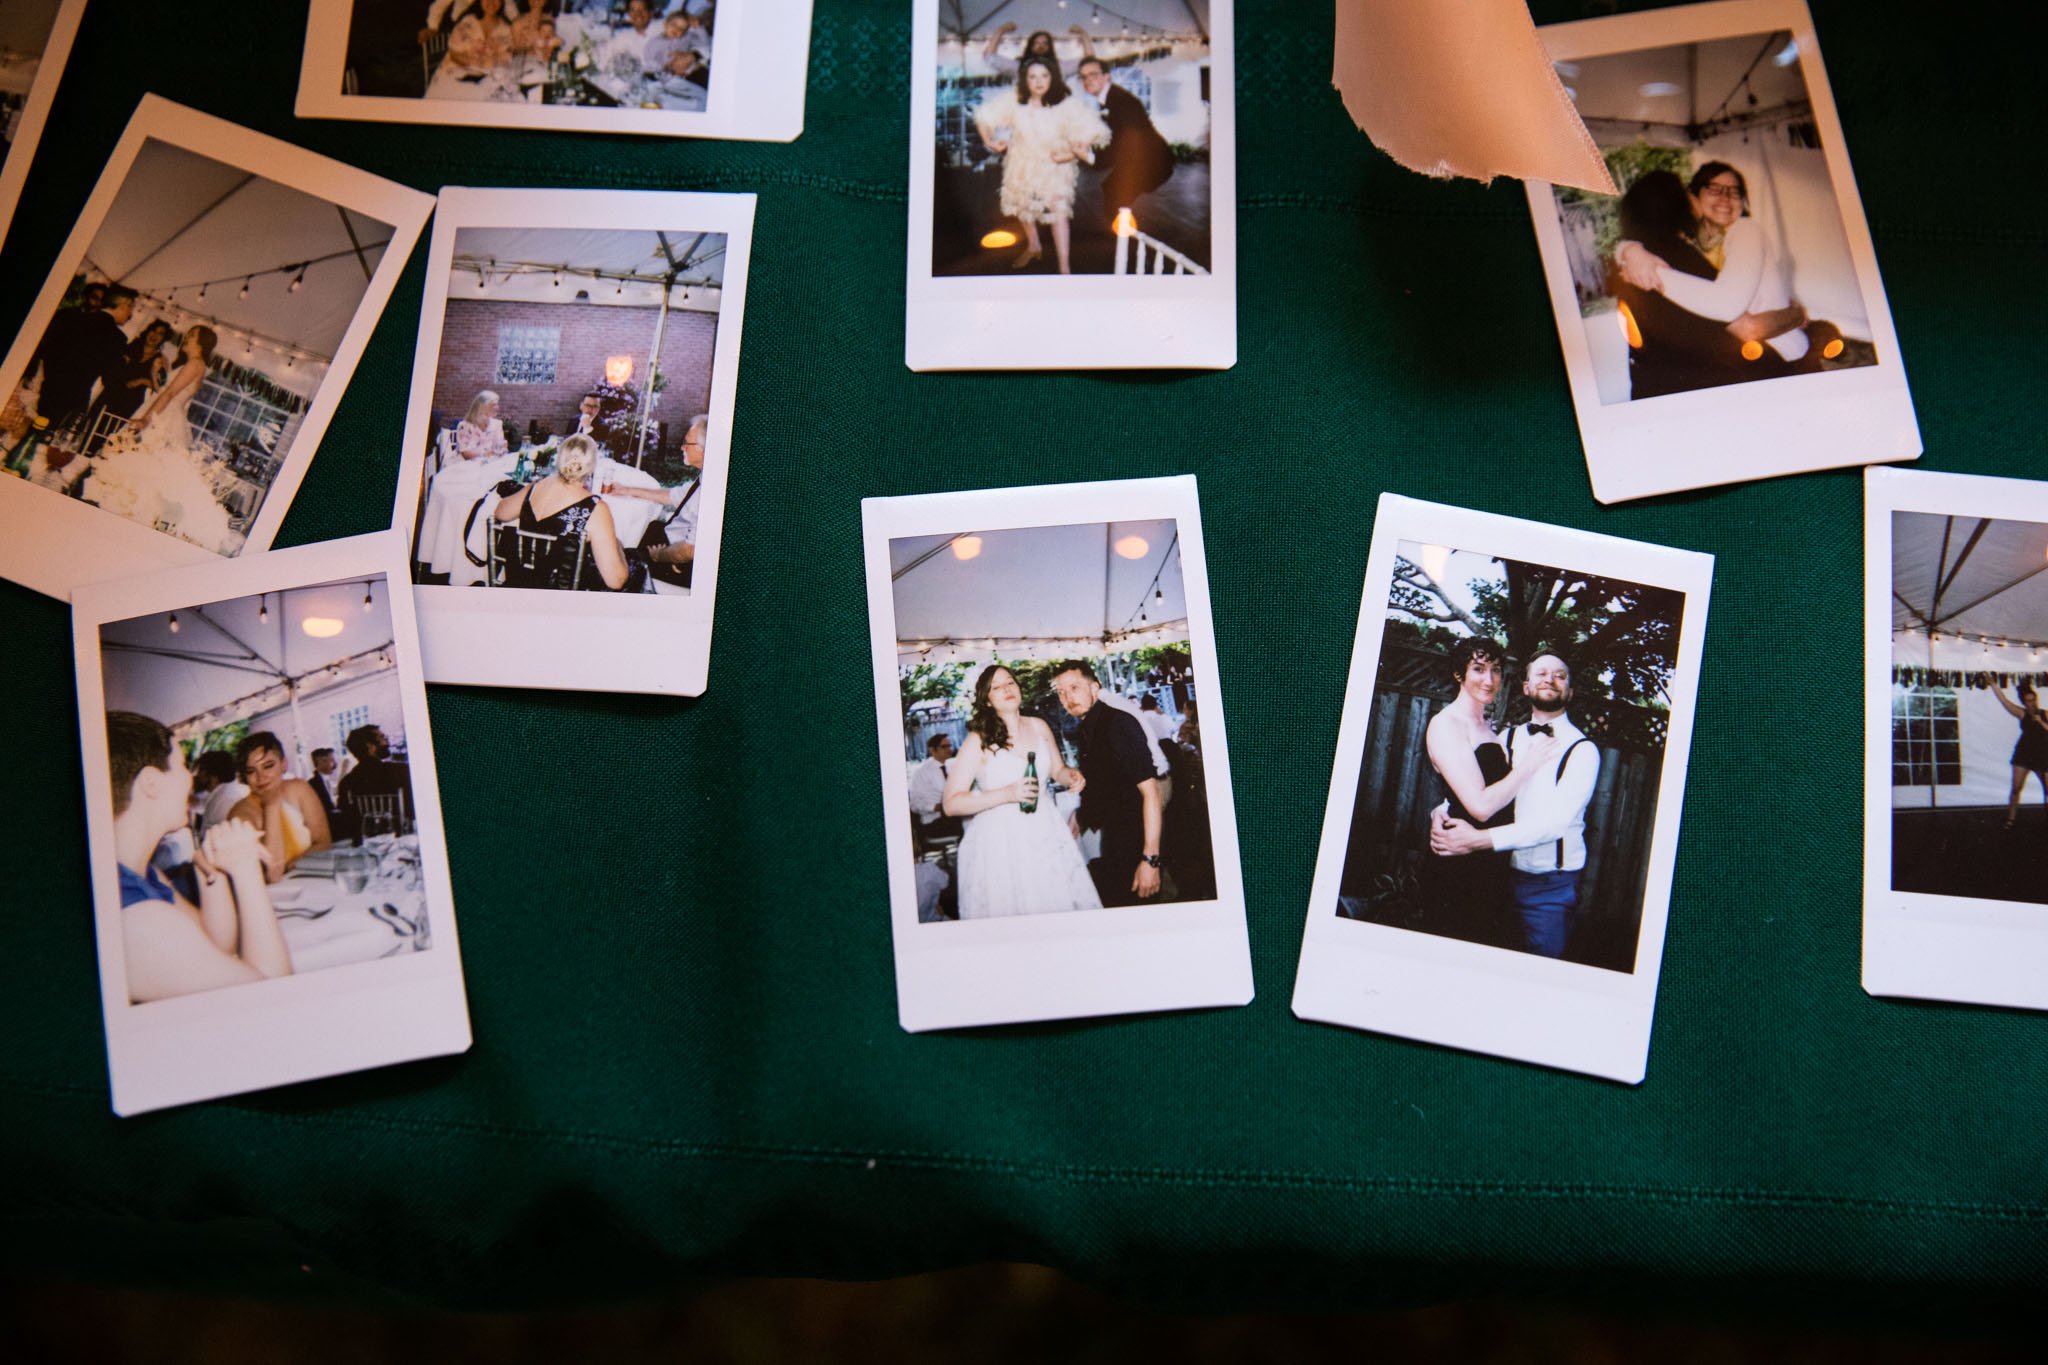 instax taken by wedding guests on a table - top down view.jpg